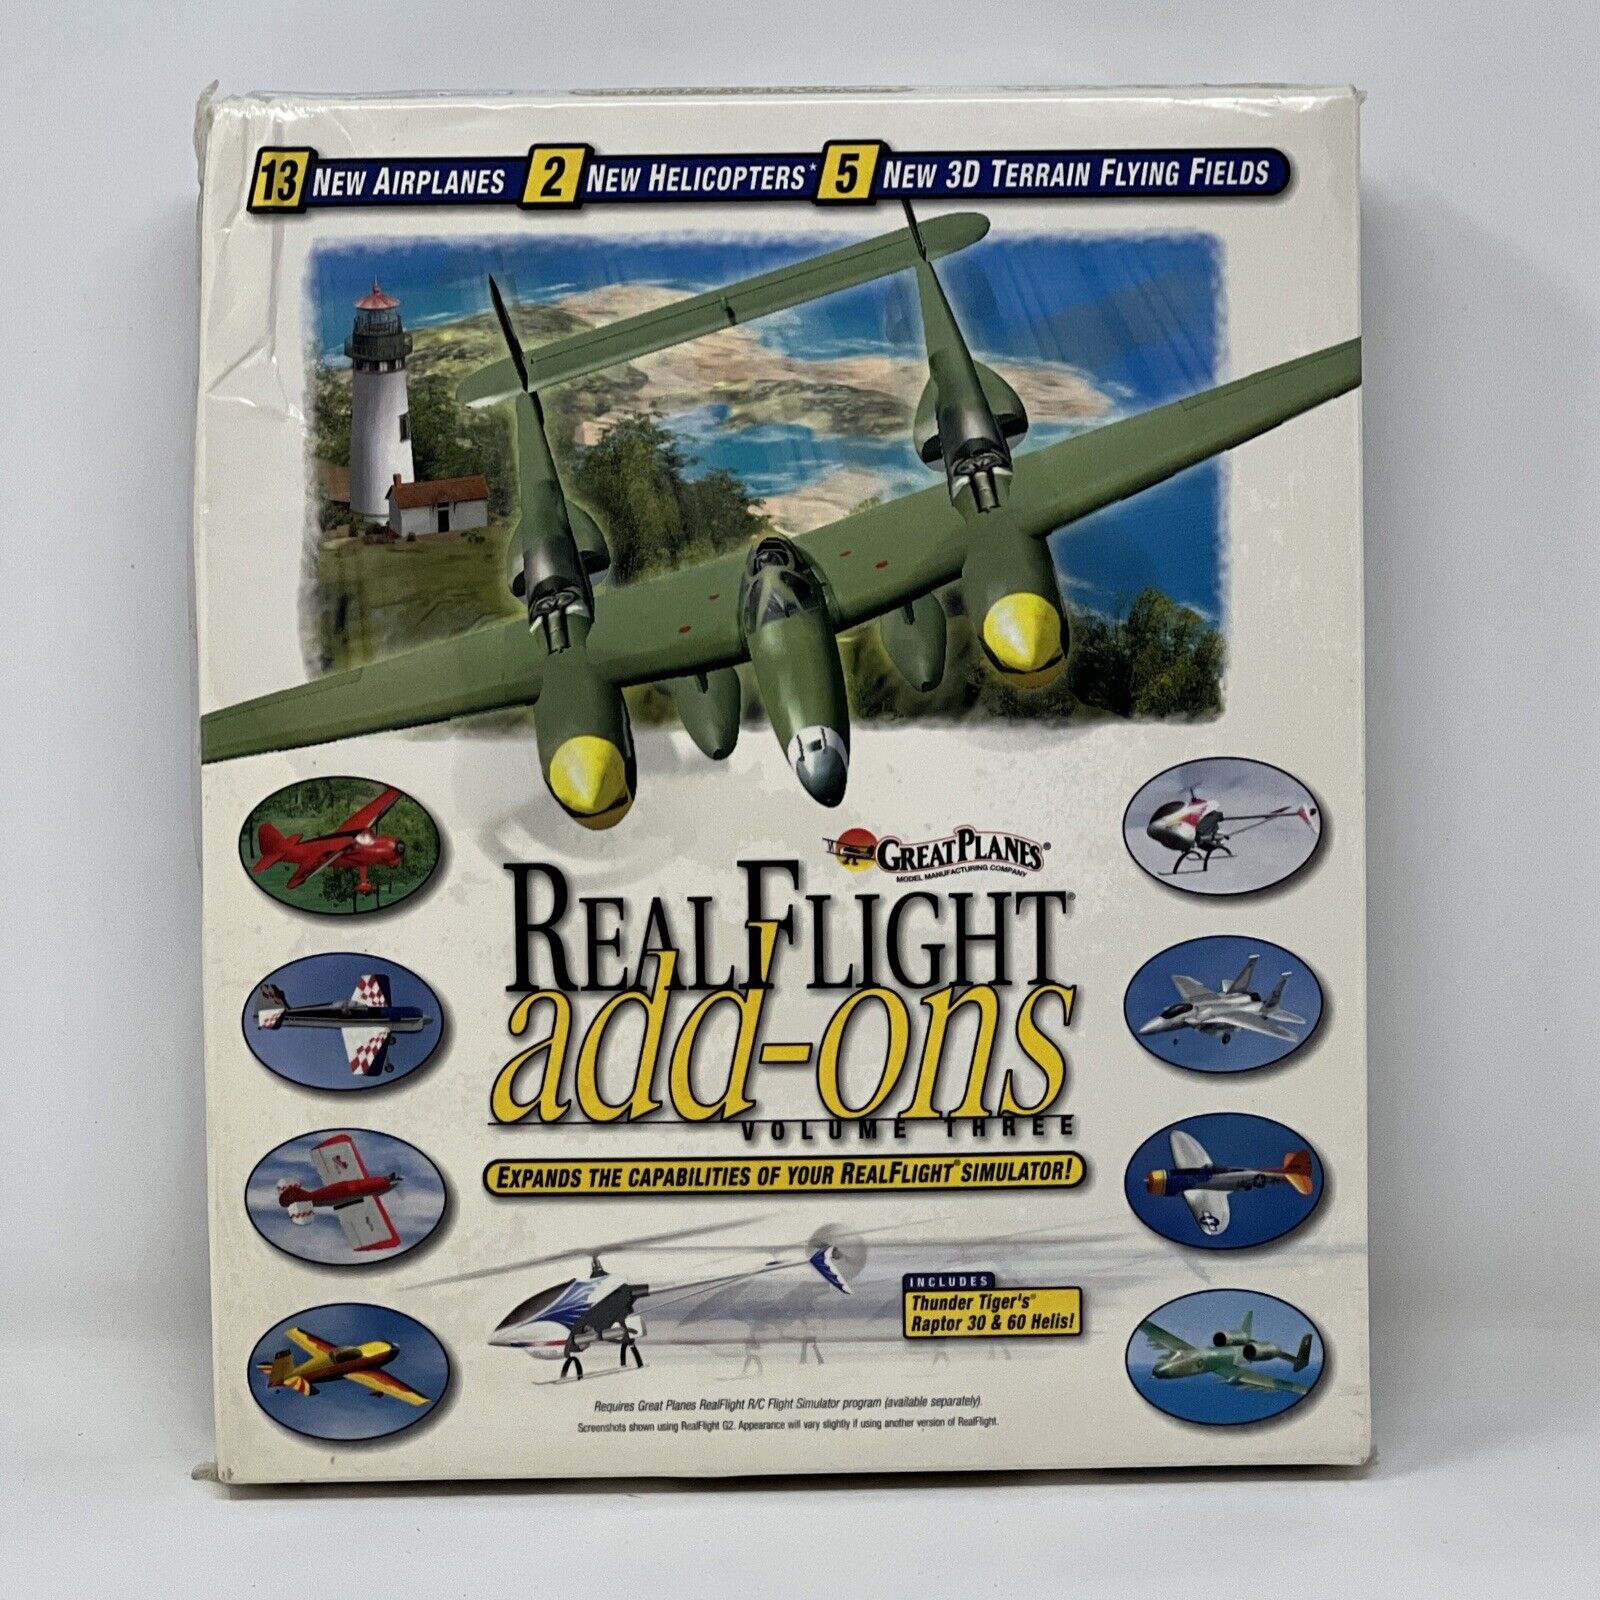 Great Planes Real Flight Add-Ons Volume 3 Vintage 2001 New Sealed Rare HTF